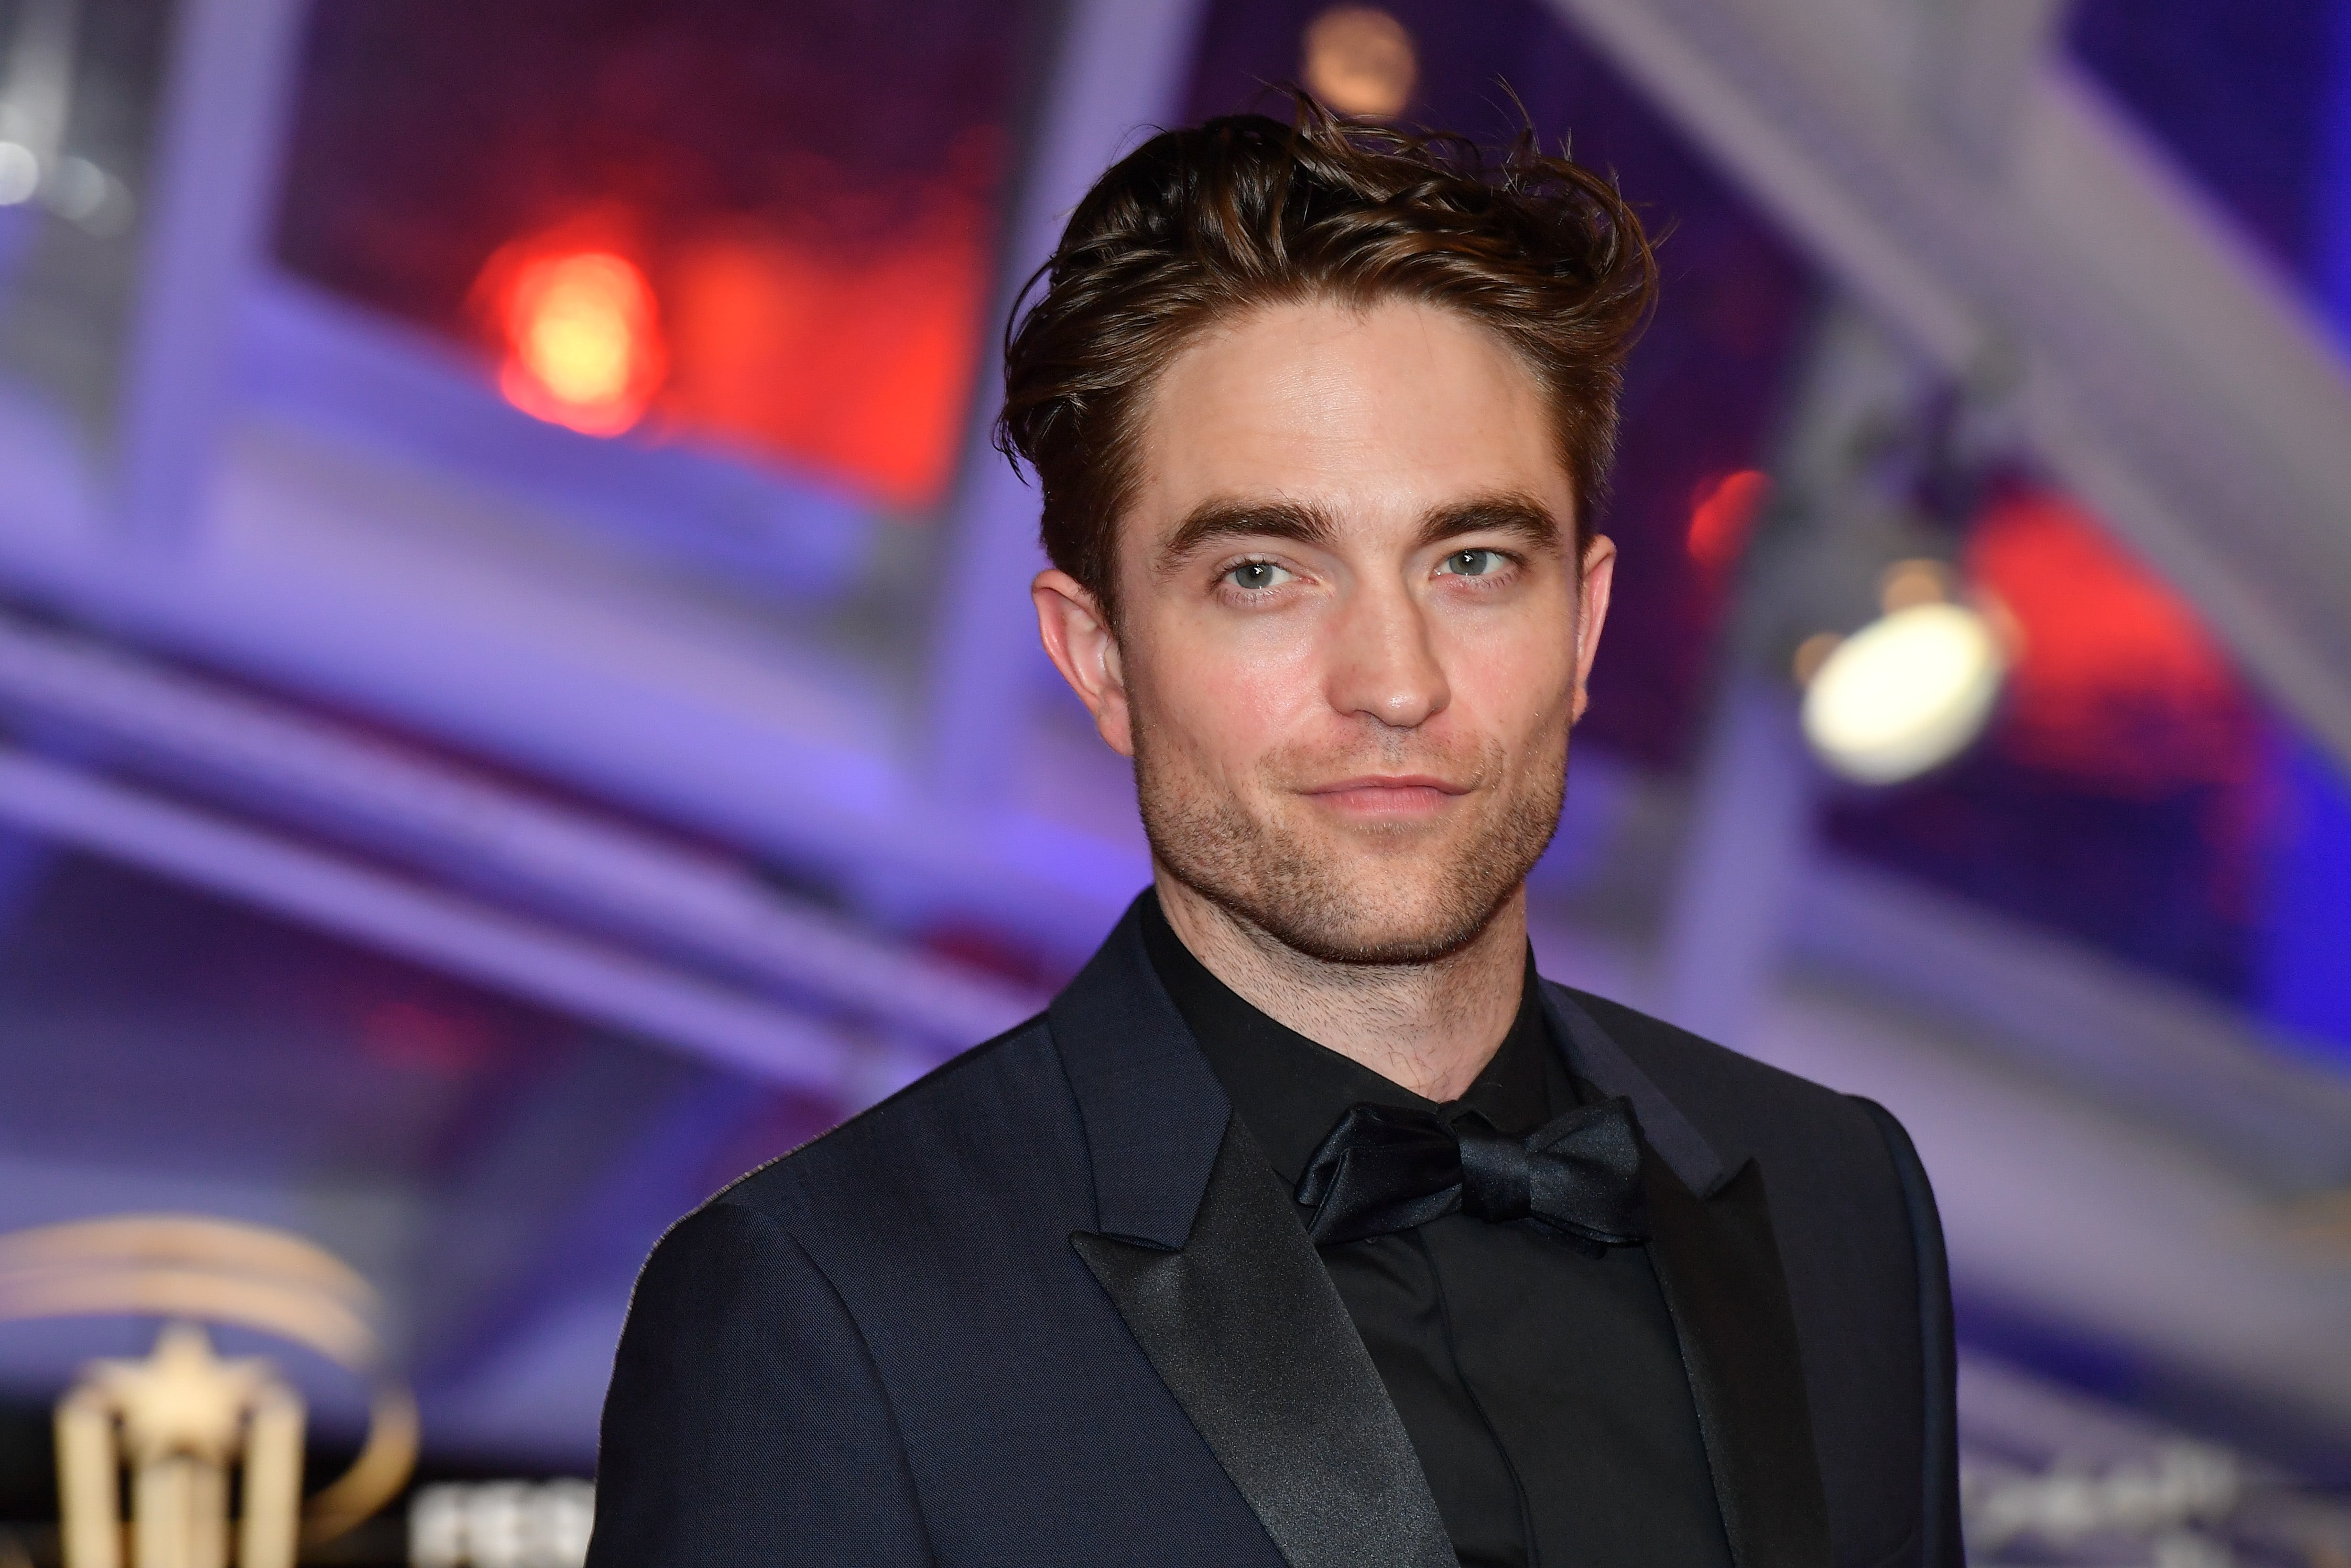 FOX NEWS: Robert Pattinson officially set to star in 'The Batman': reports